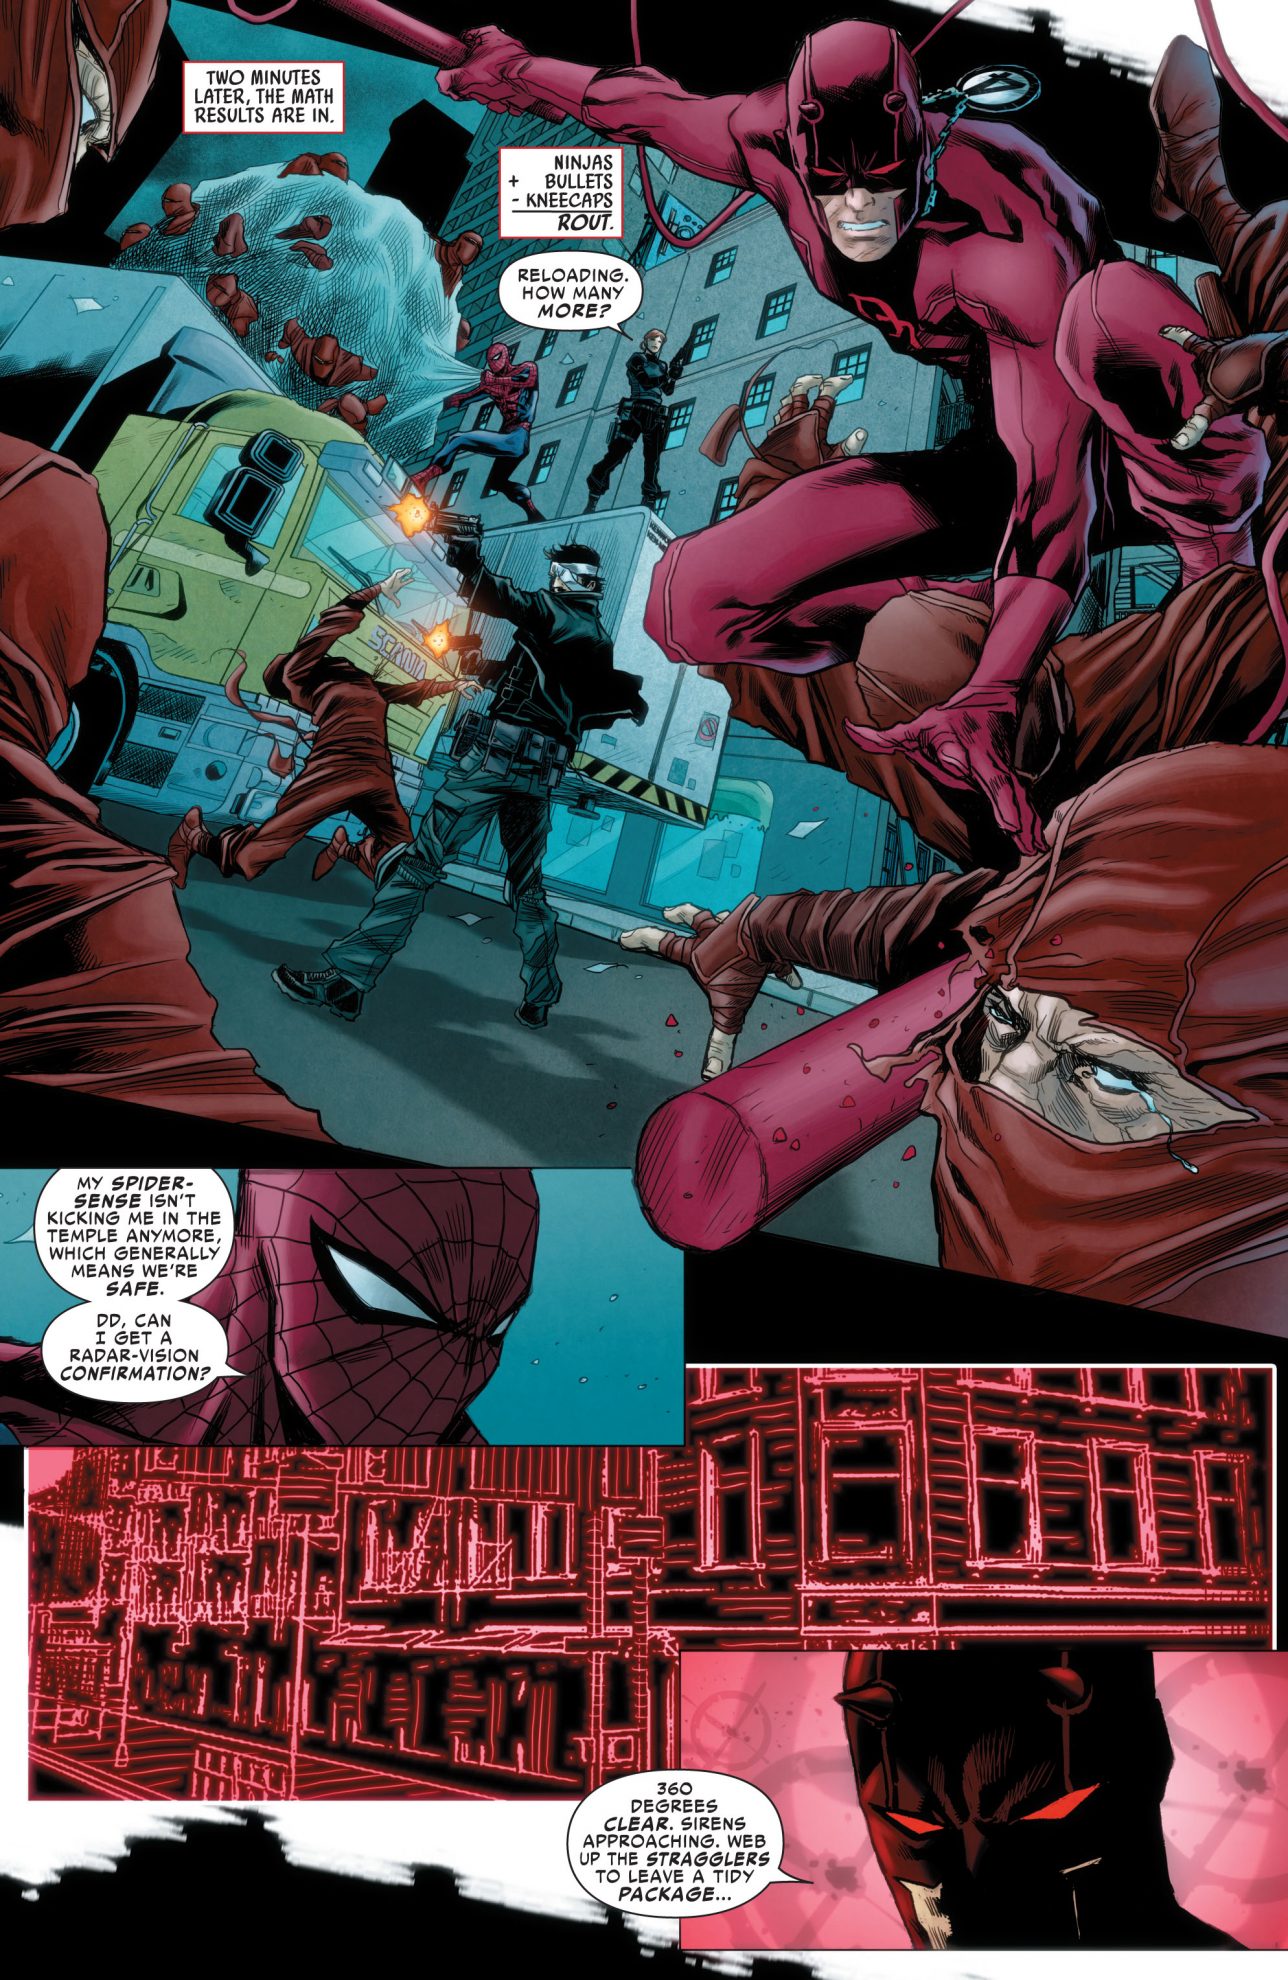 Spider-Man, Daredevil And The Punisher VS Hand Ninjas